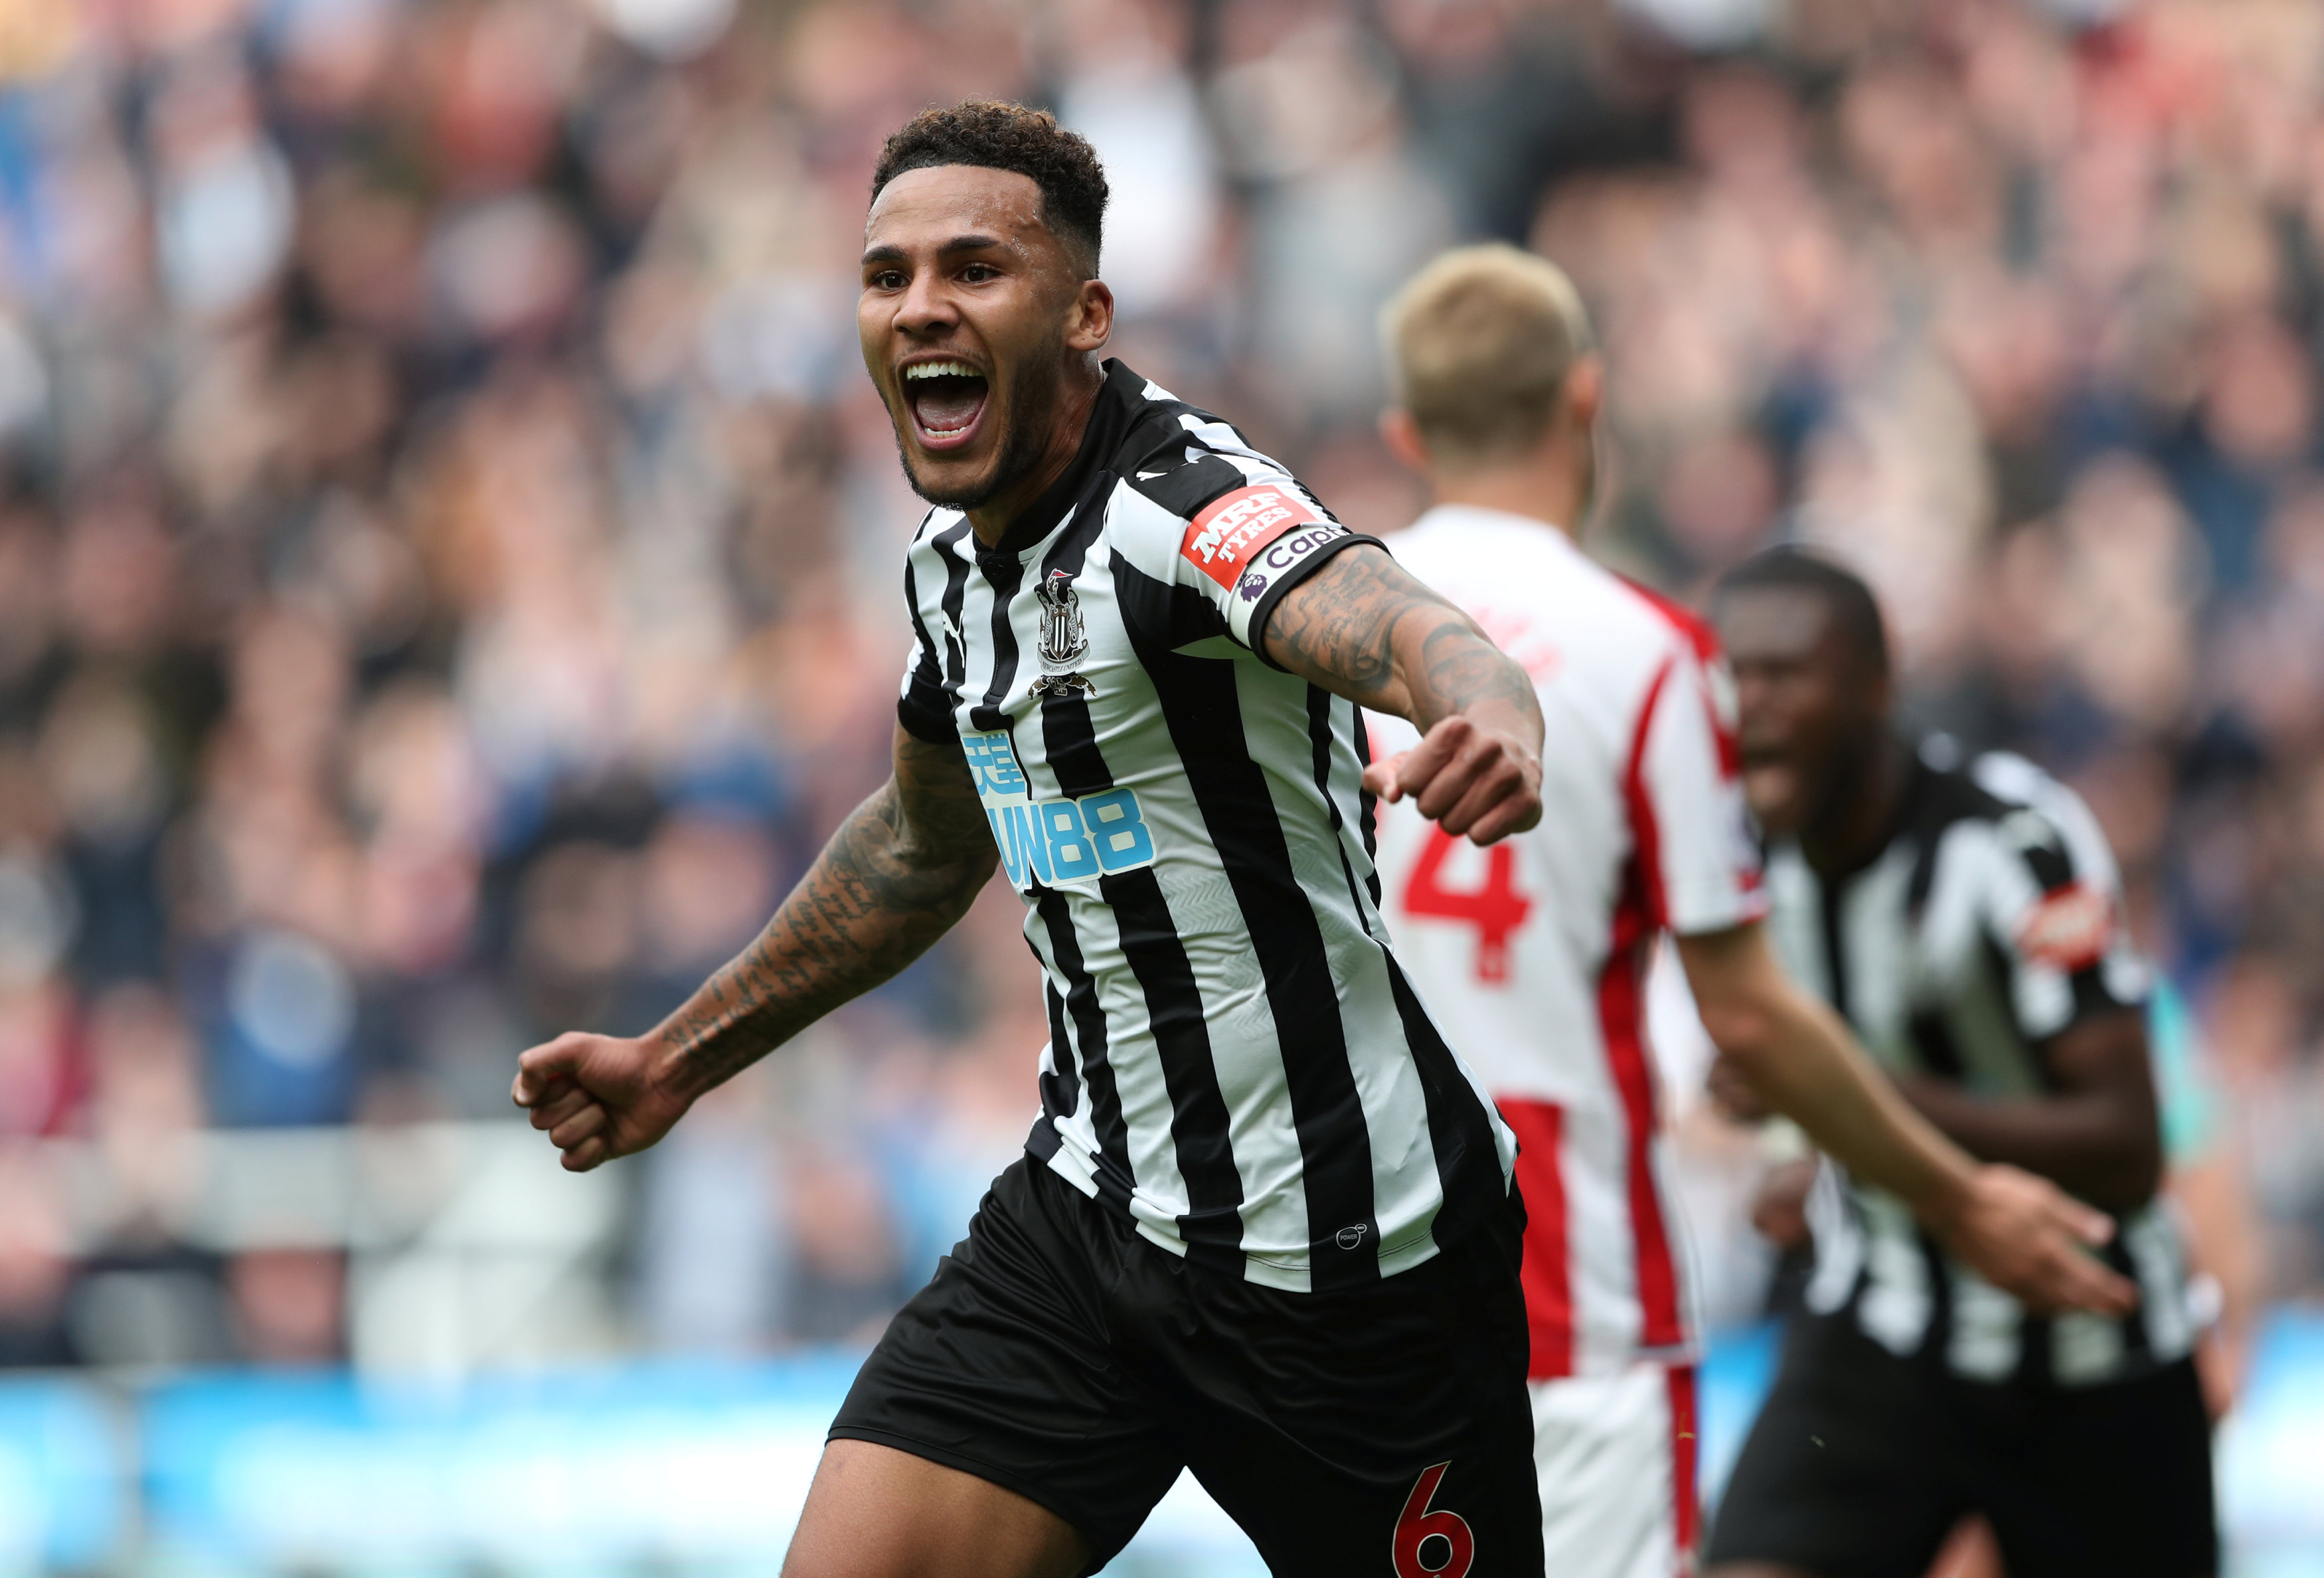 Football: Lascelles gives Newcastle United third successive win